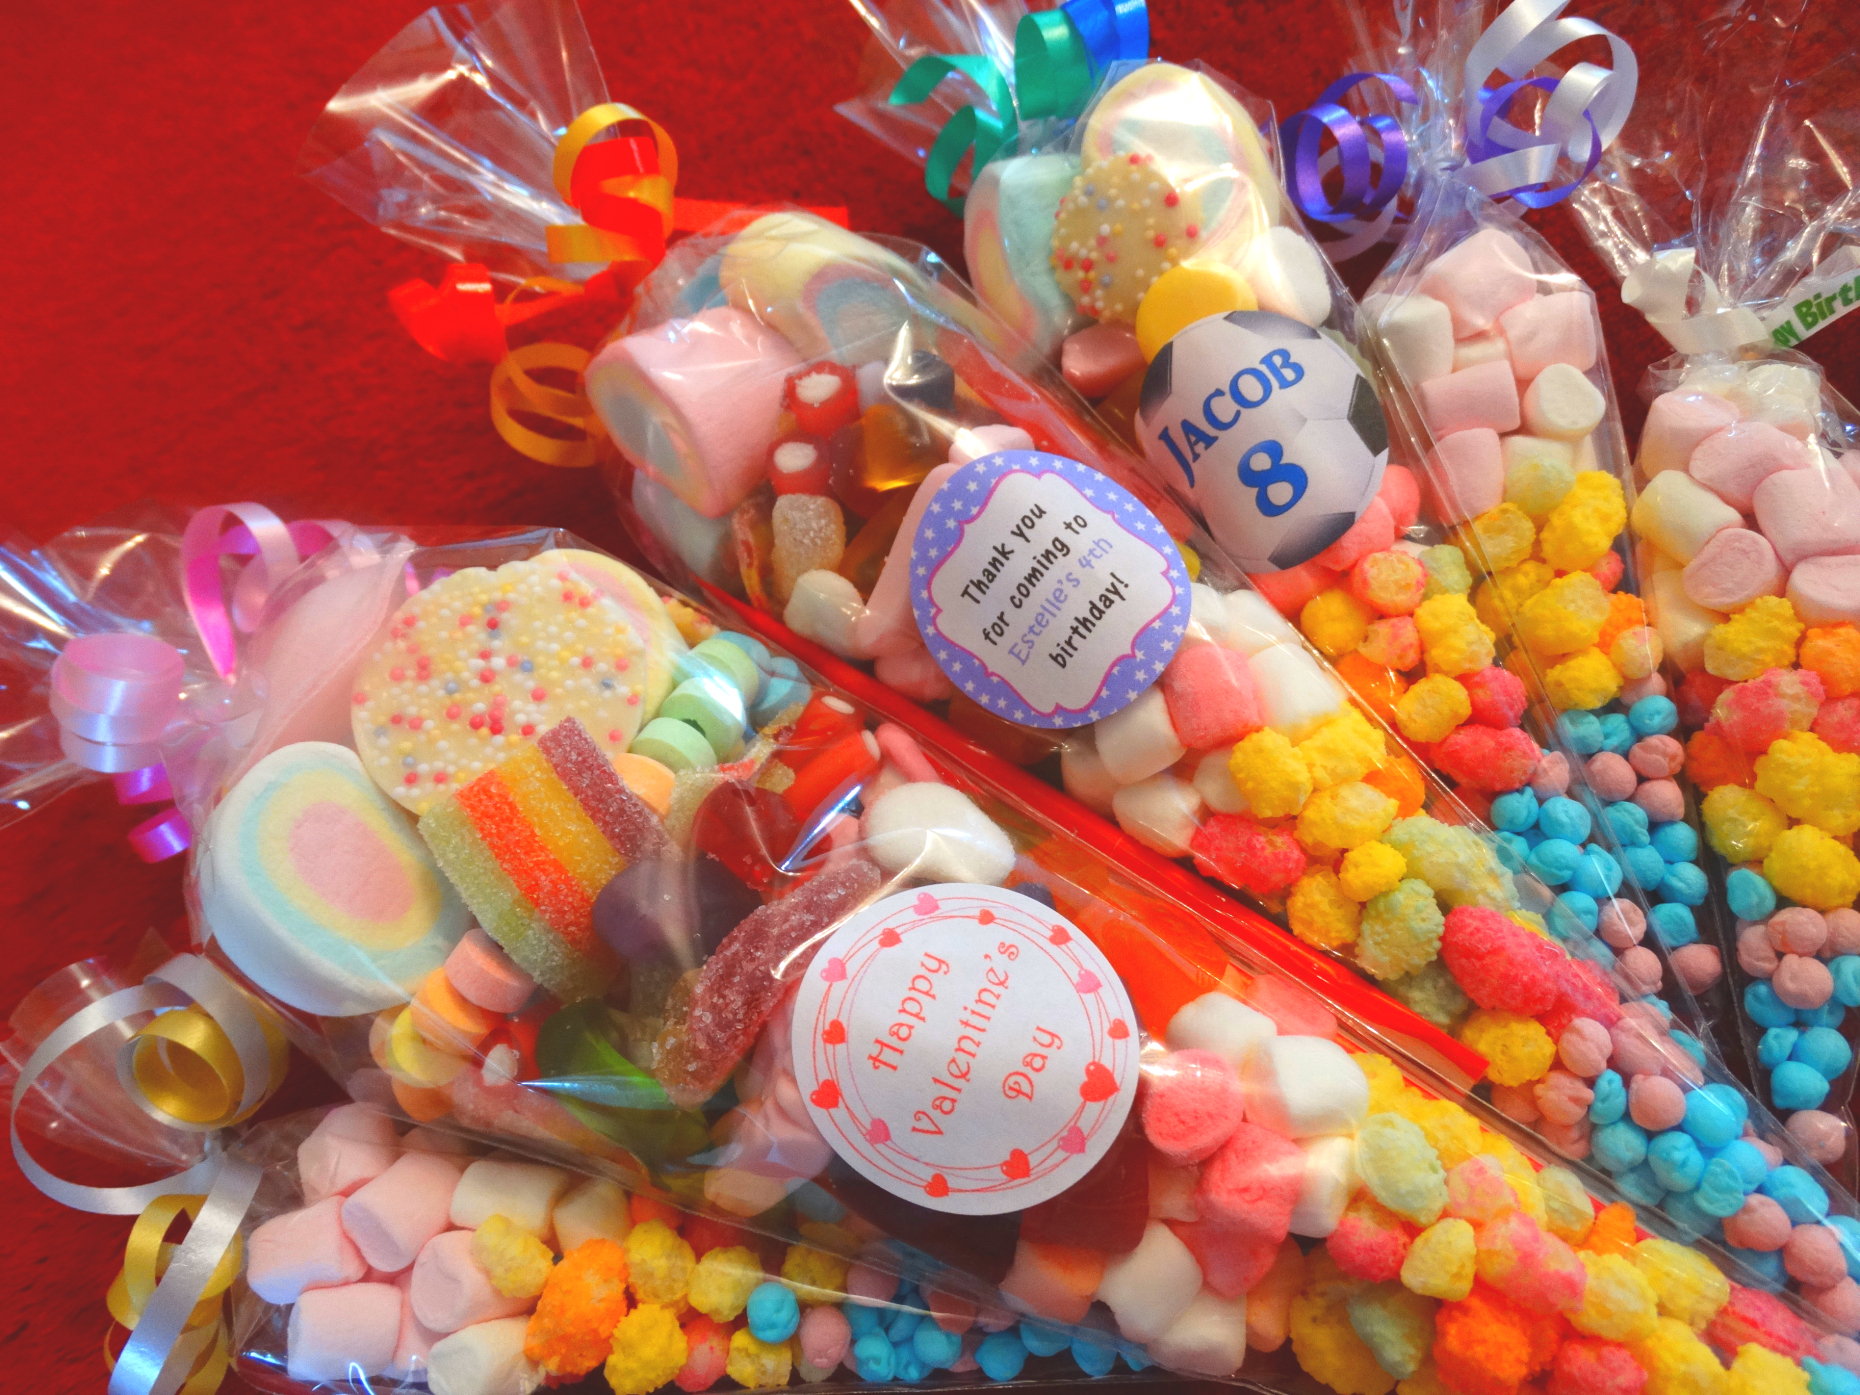 15 Plastic Sweet Jars, 1 tong, 1 scoop, 100 bags for Truly Sweet Candy